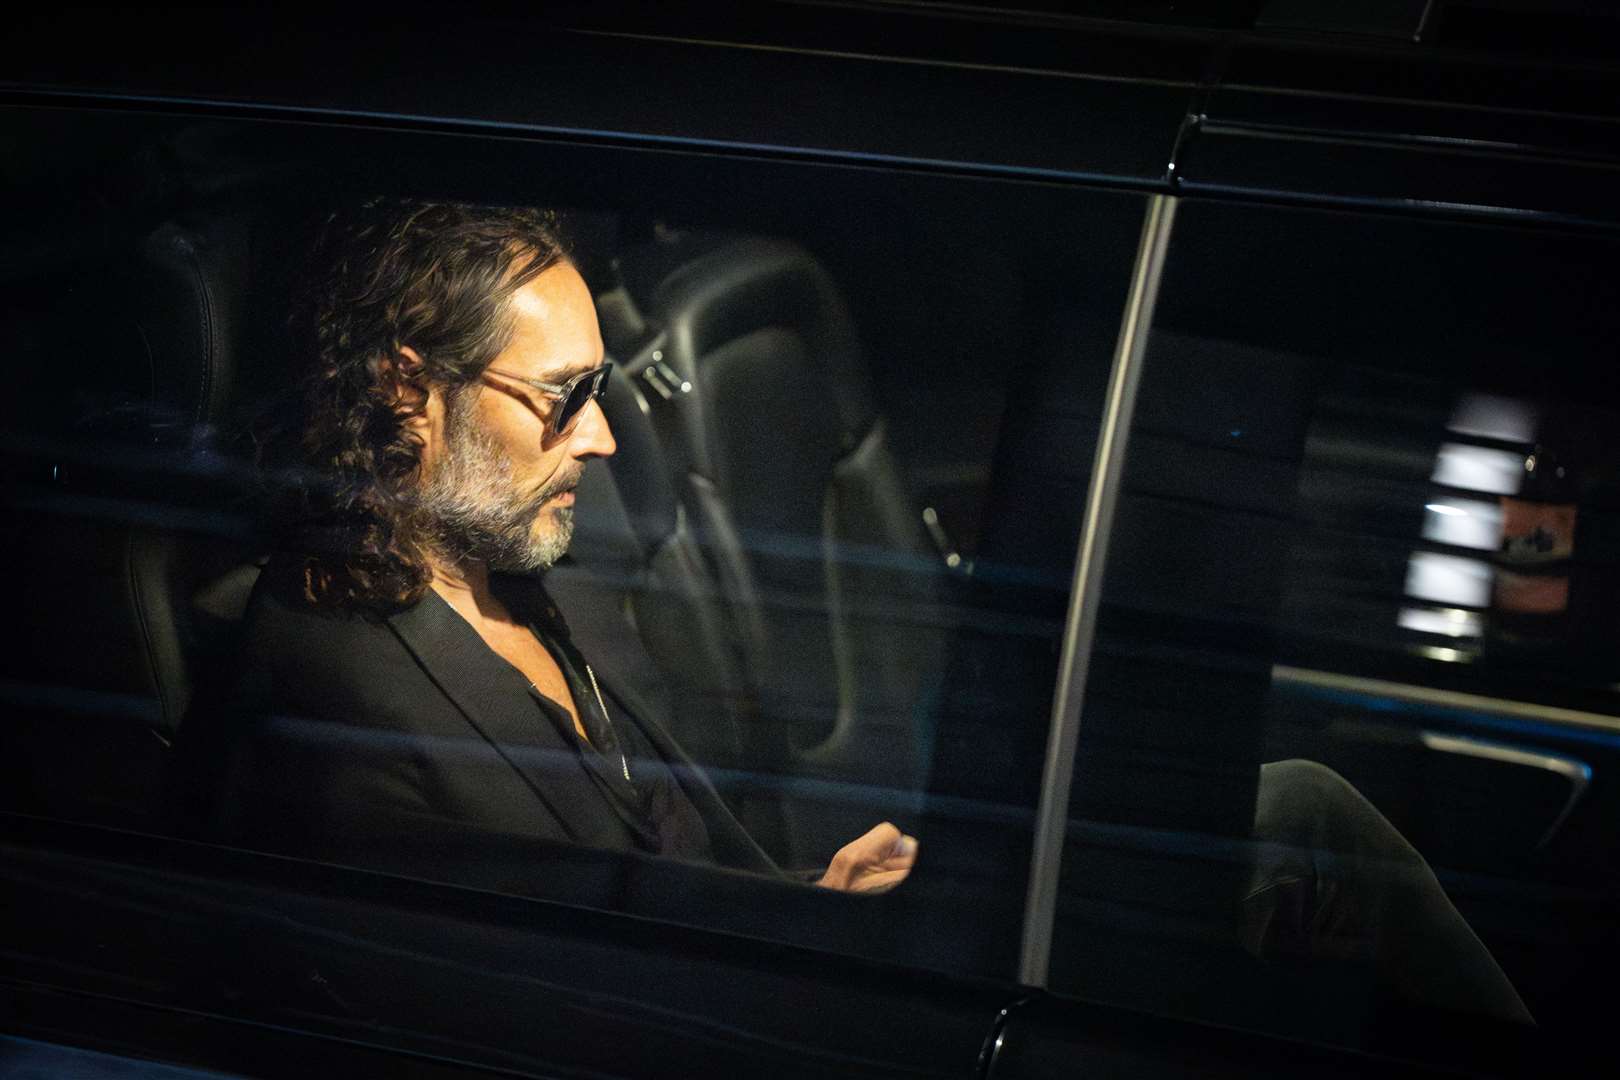 Russell Brand leaves the Troubadour Wembley Park theatre in north-west London after performing a comedy set as he faces allegations of sexual assault (James Manning/PA)